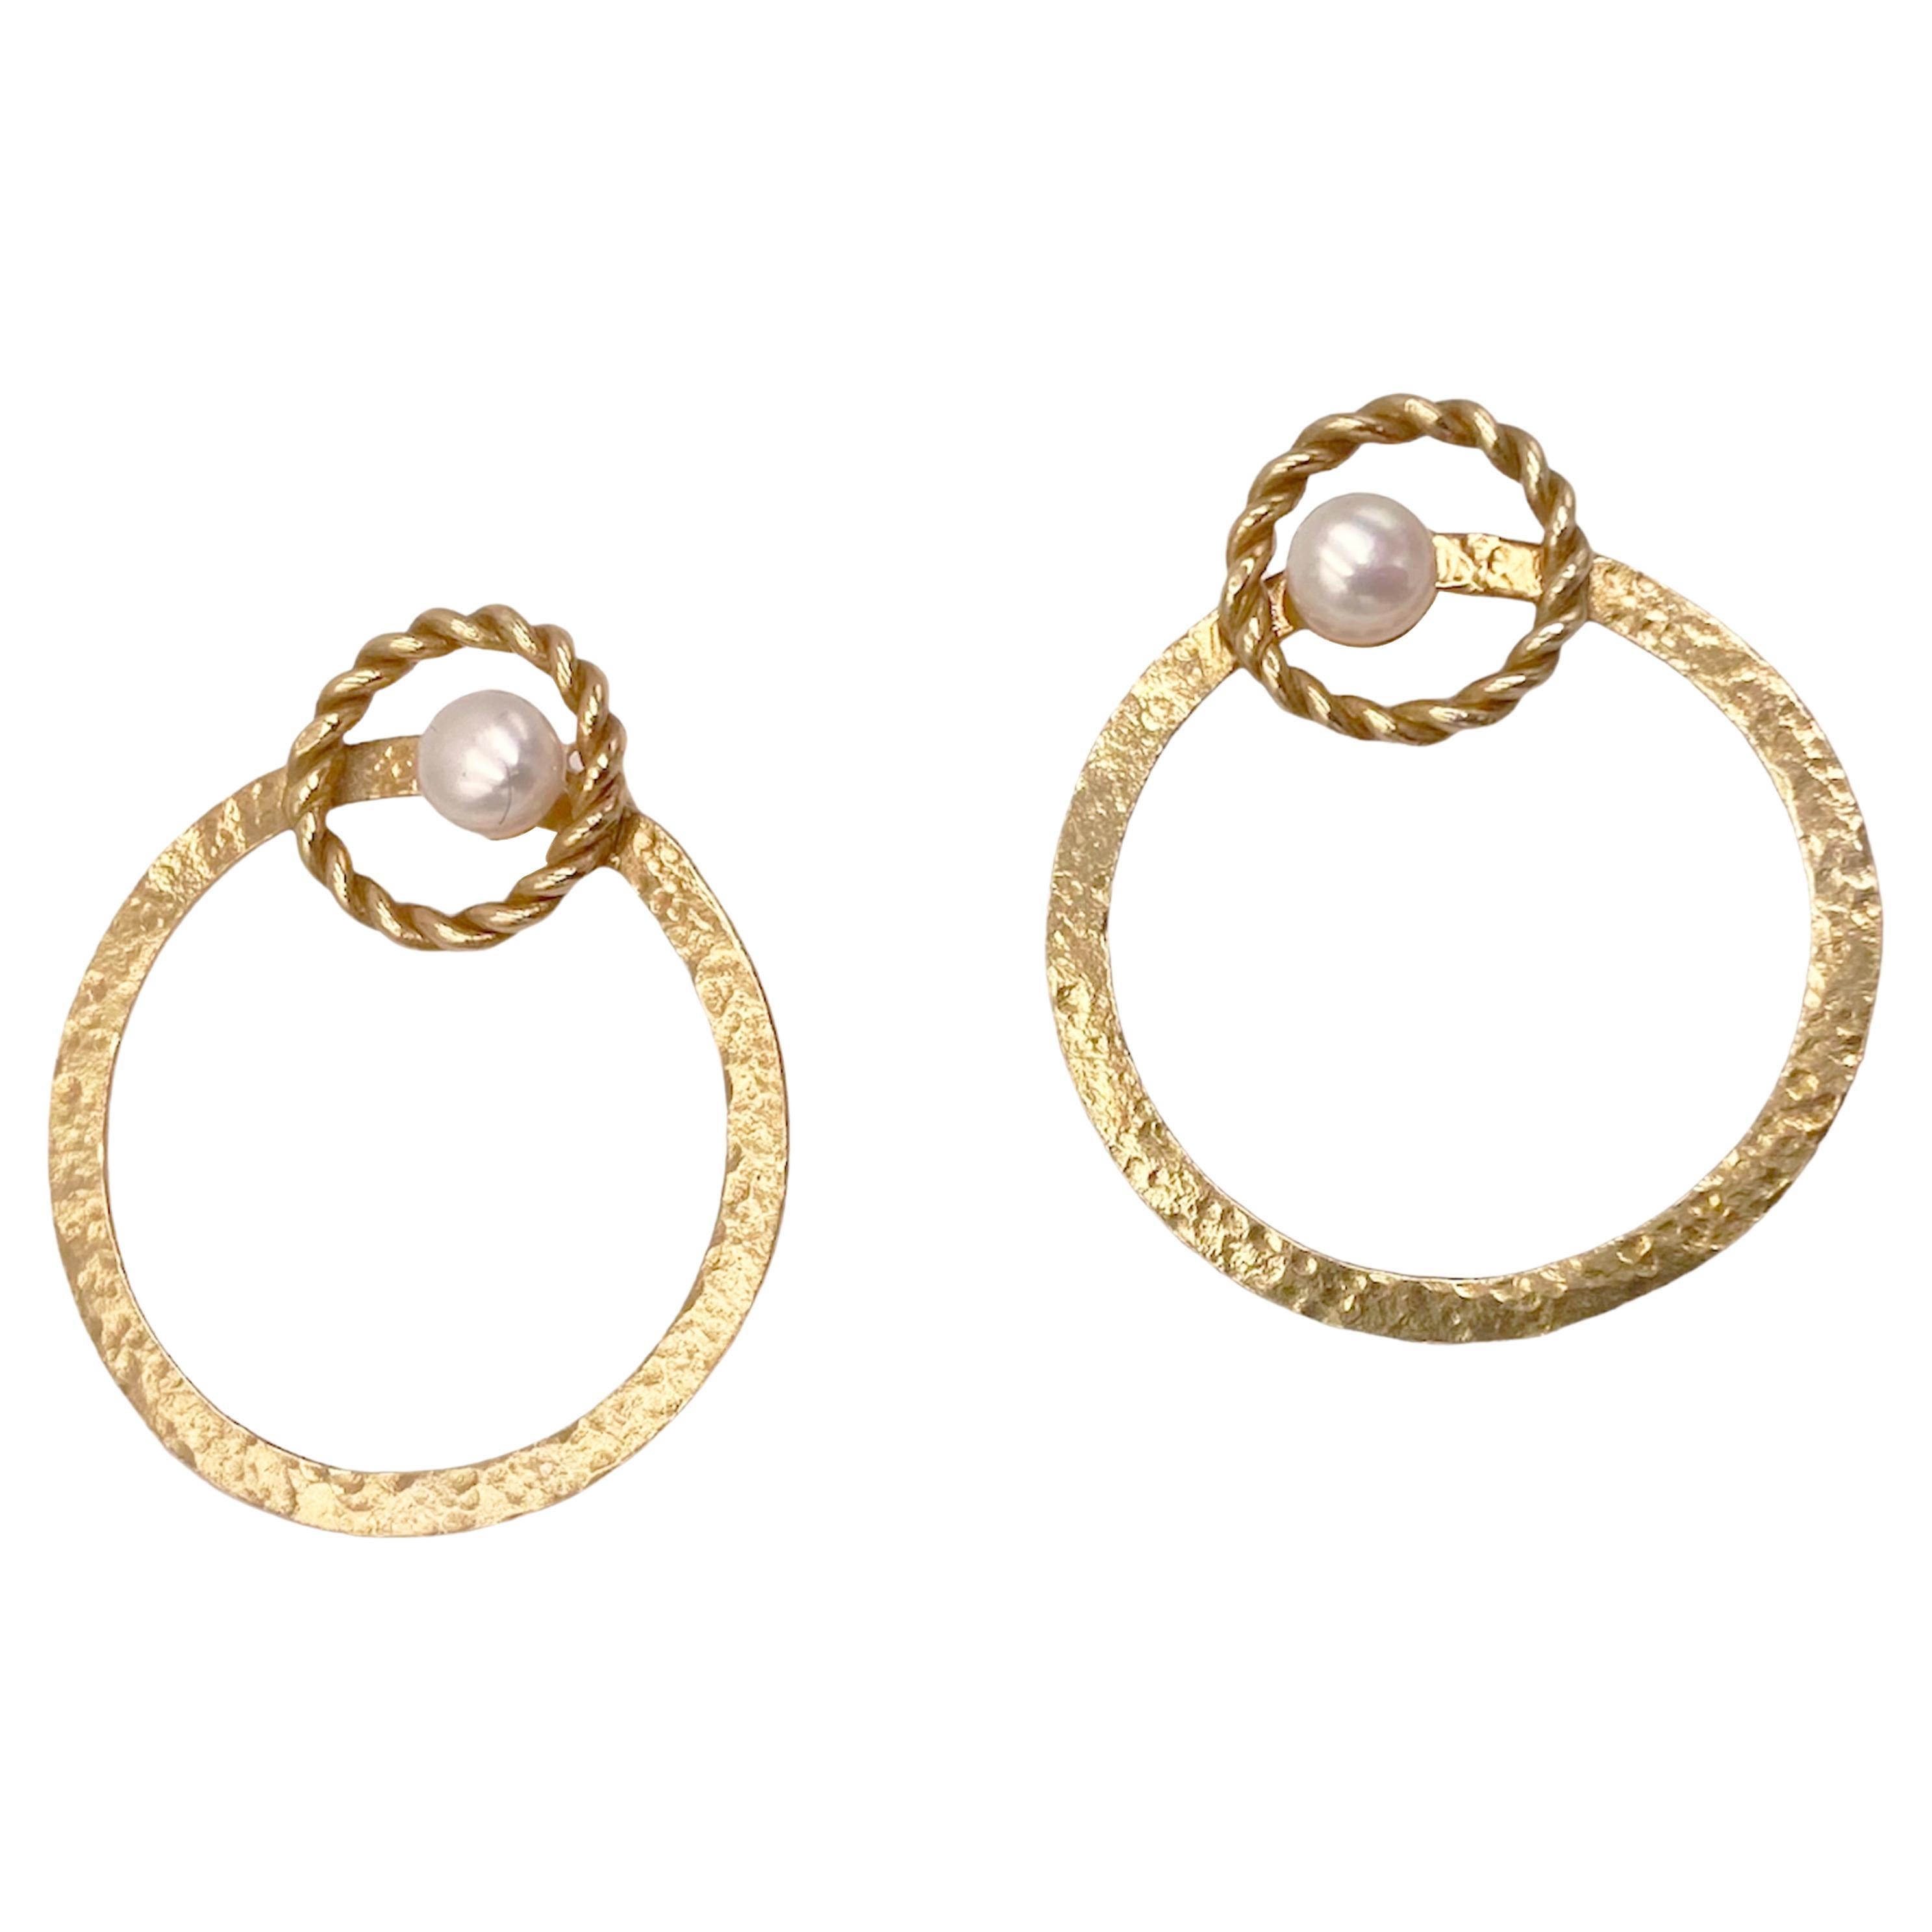 Rossella Ugolini 18K Yellow Gold Hammered Handcrafted Circle Large Hoop Earrings